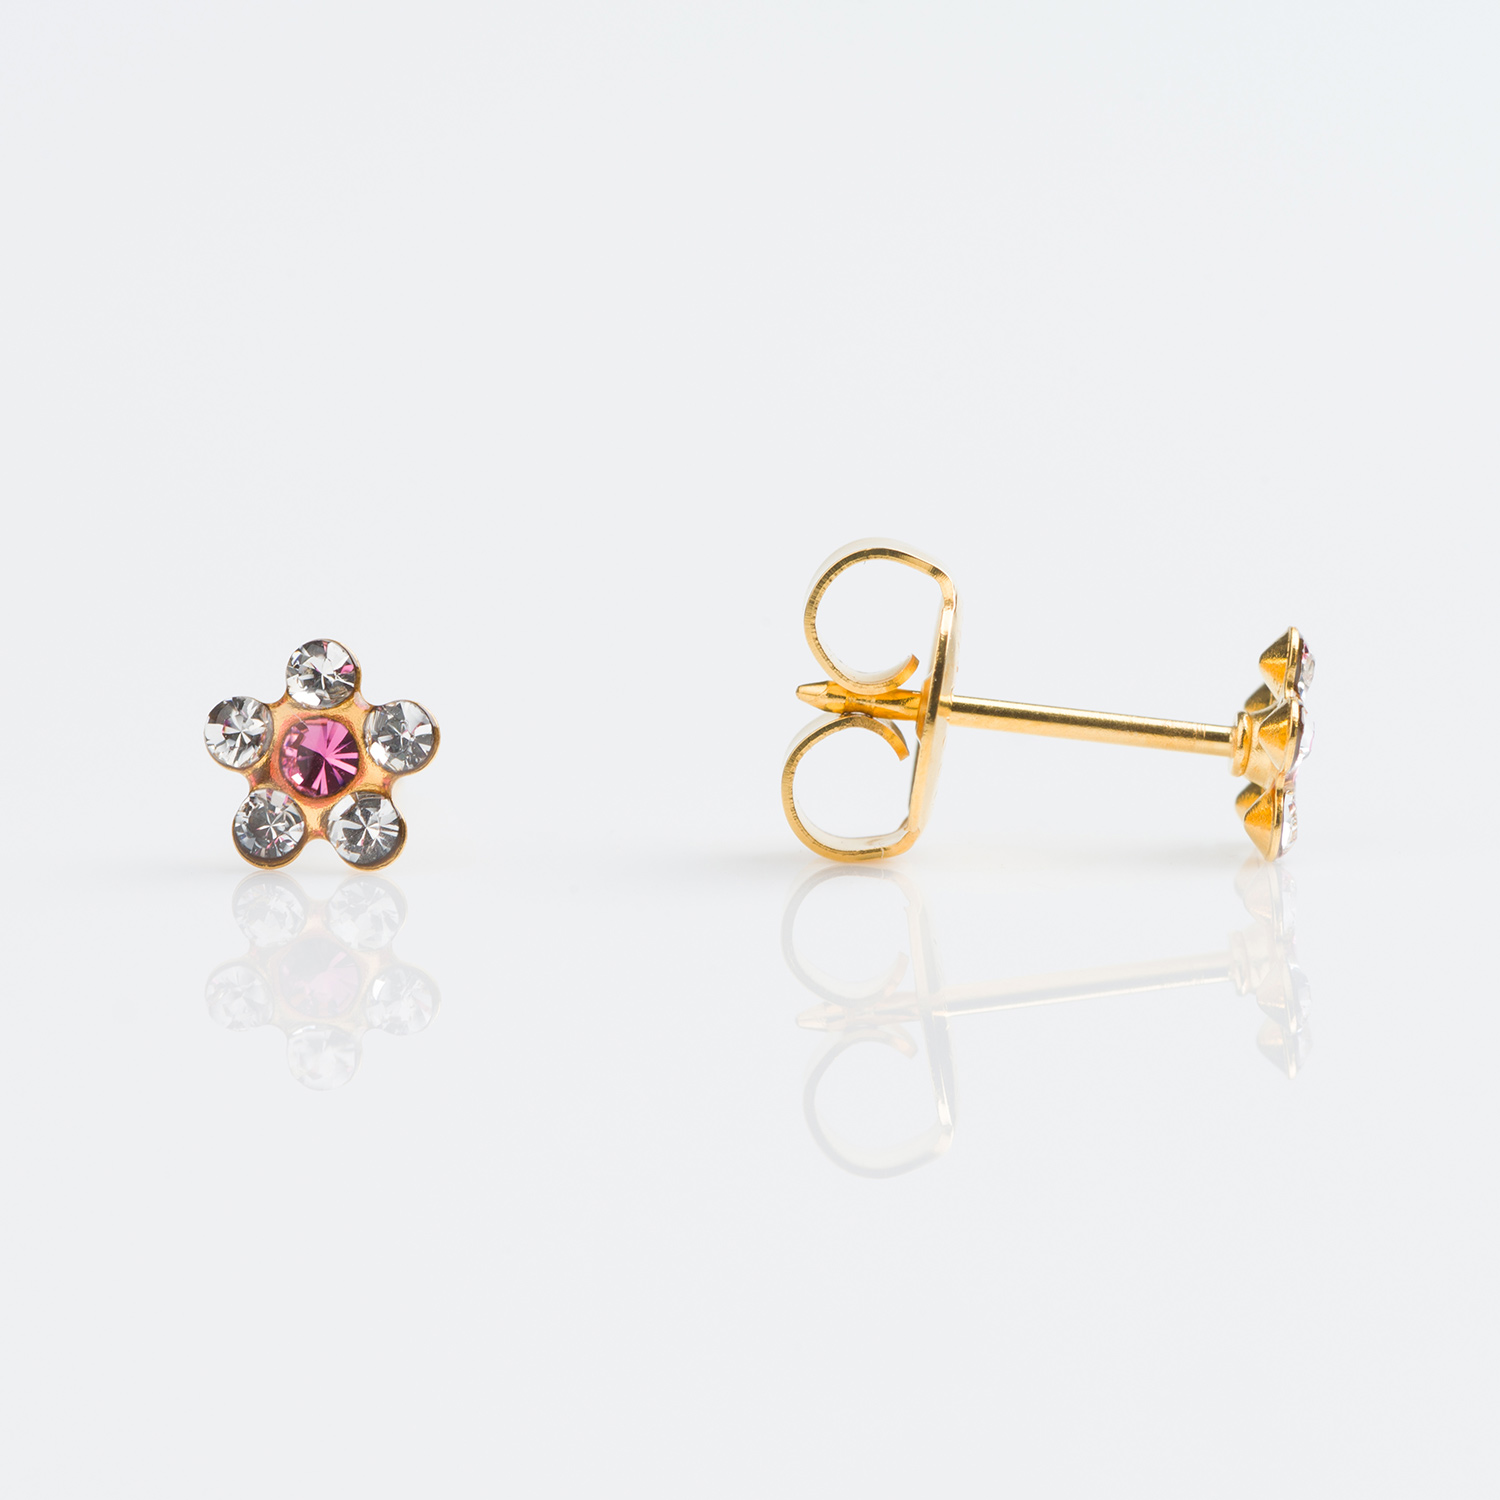 Studex Sensitive Gold Plated Daisy Crystal Rose Stud Earring